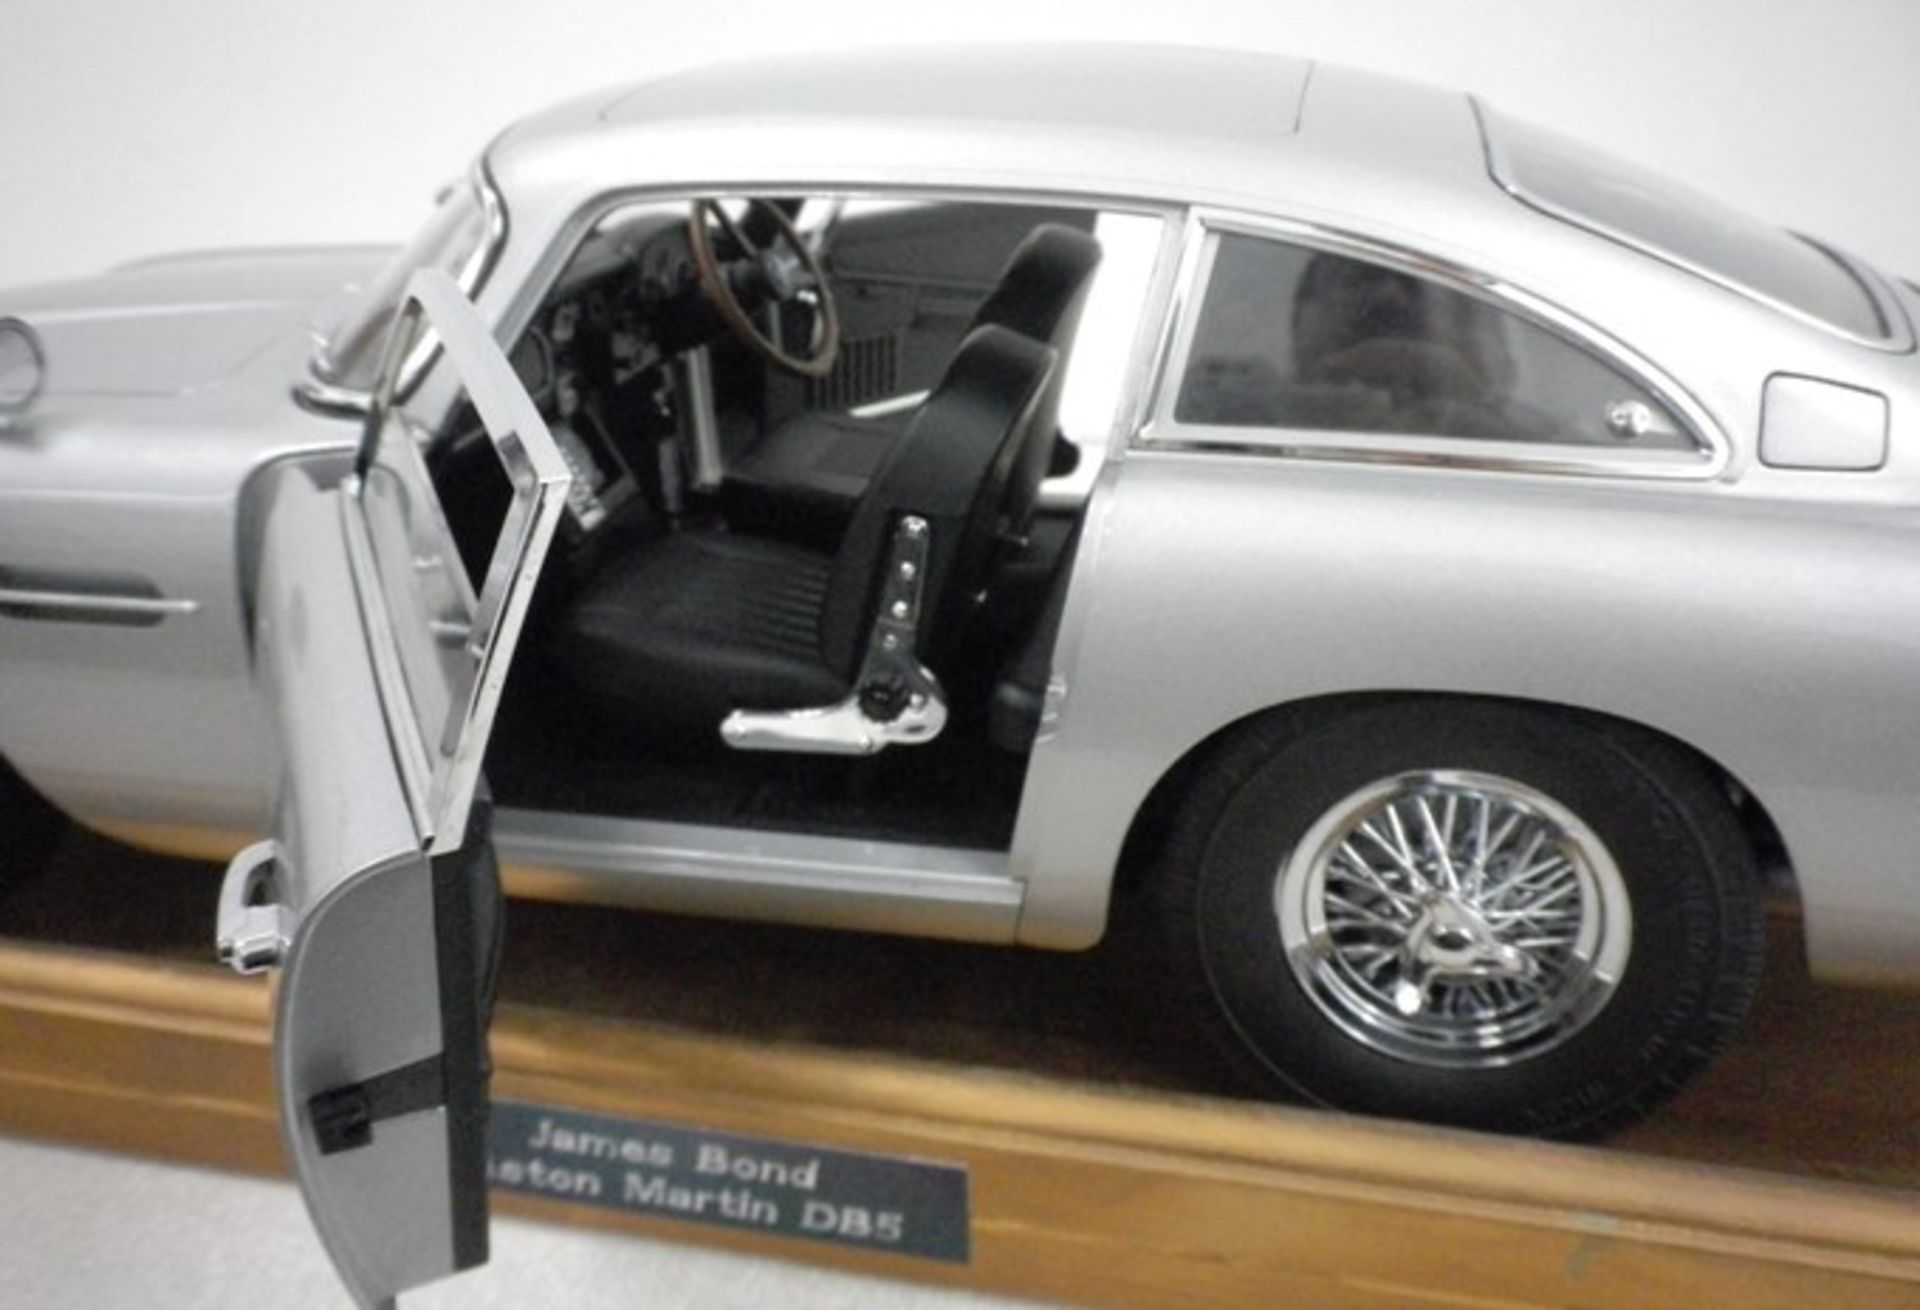 James Bond Aston Martin DB5.Estimate : £850 - £1,000 A large 1/8 scale, hand-built model of the - Image 3 of 4